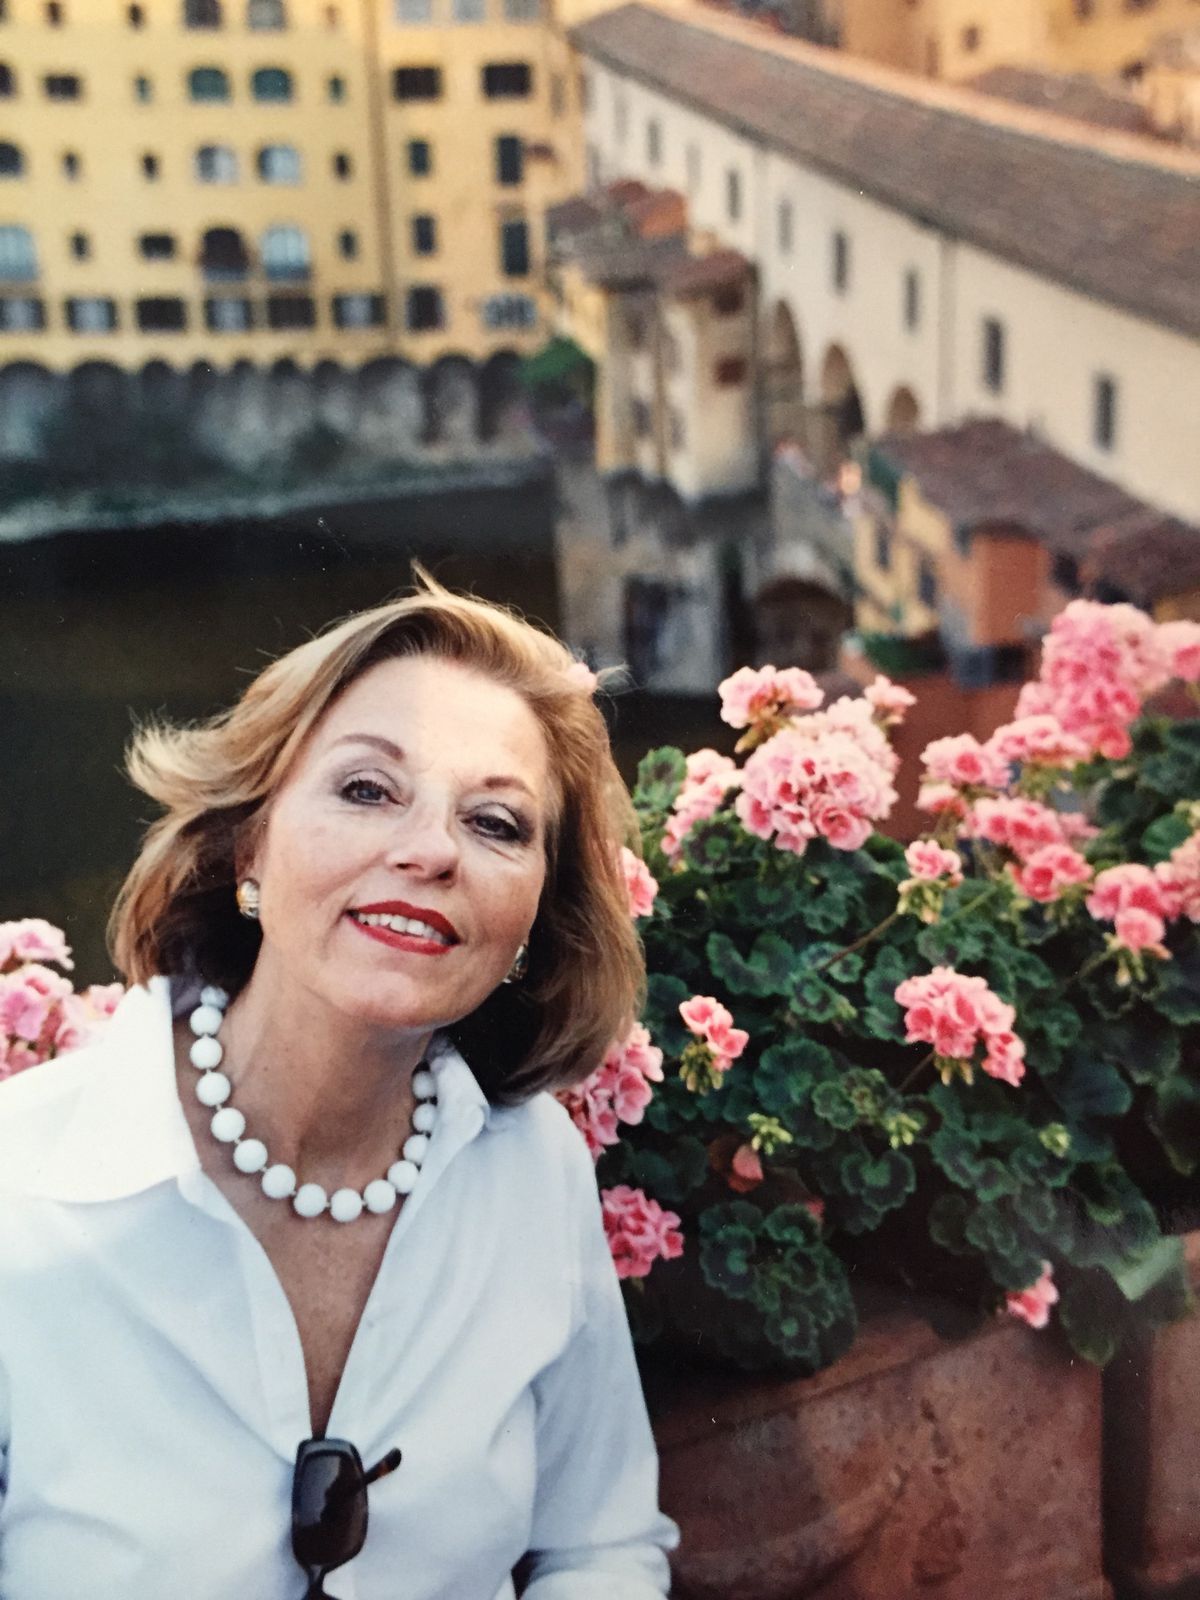 Ariel Bybee poses for a photo in Italy.